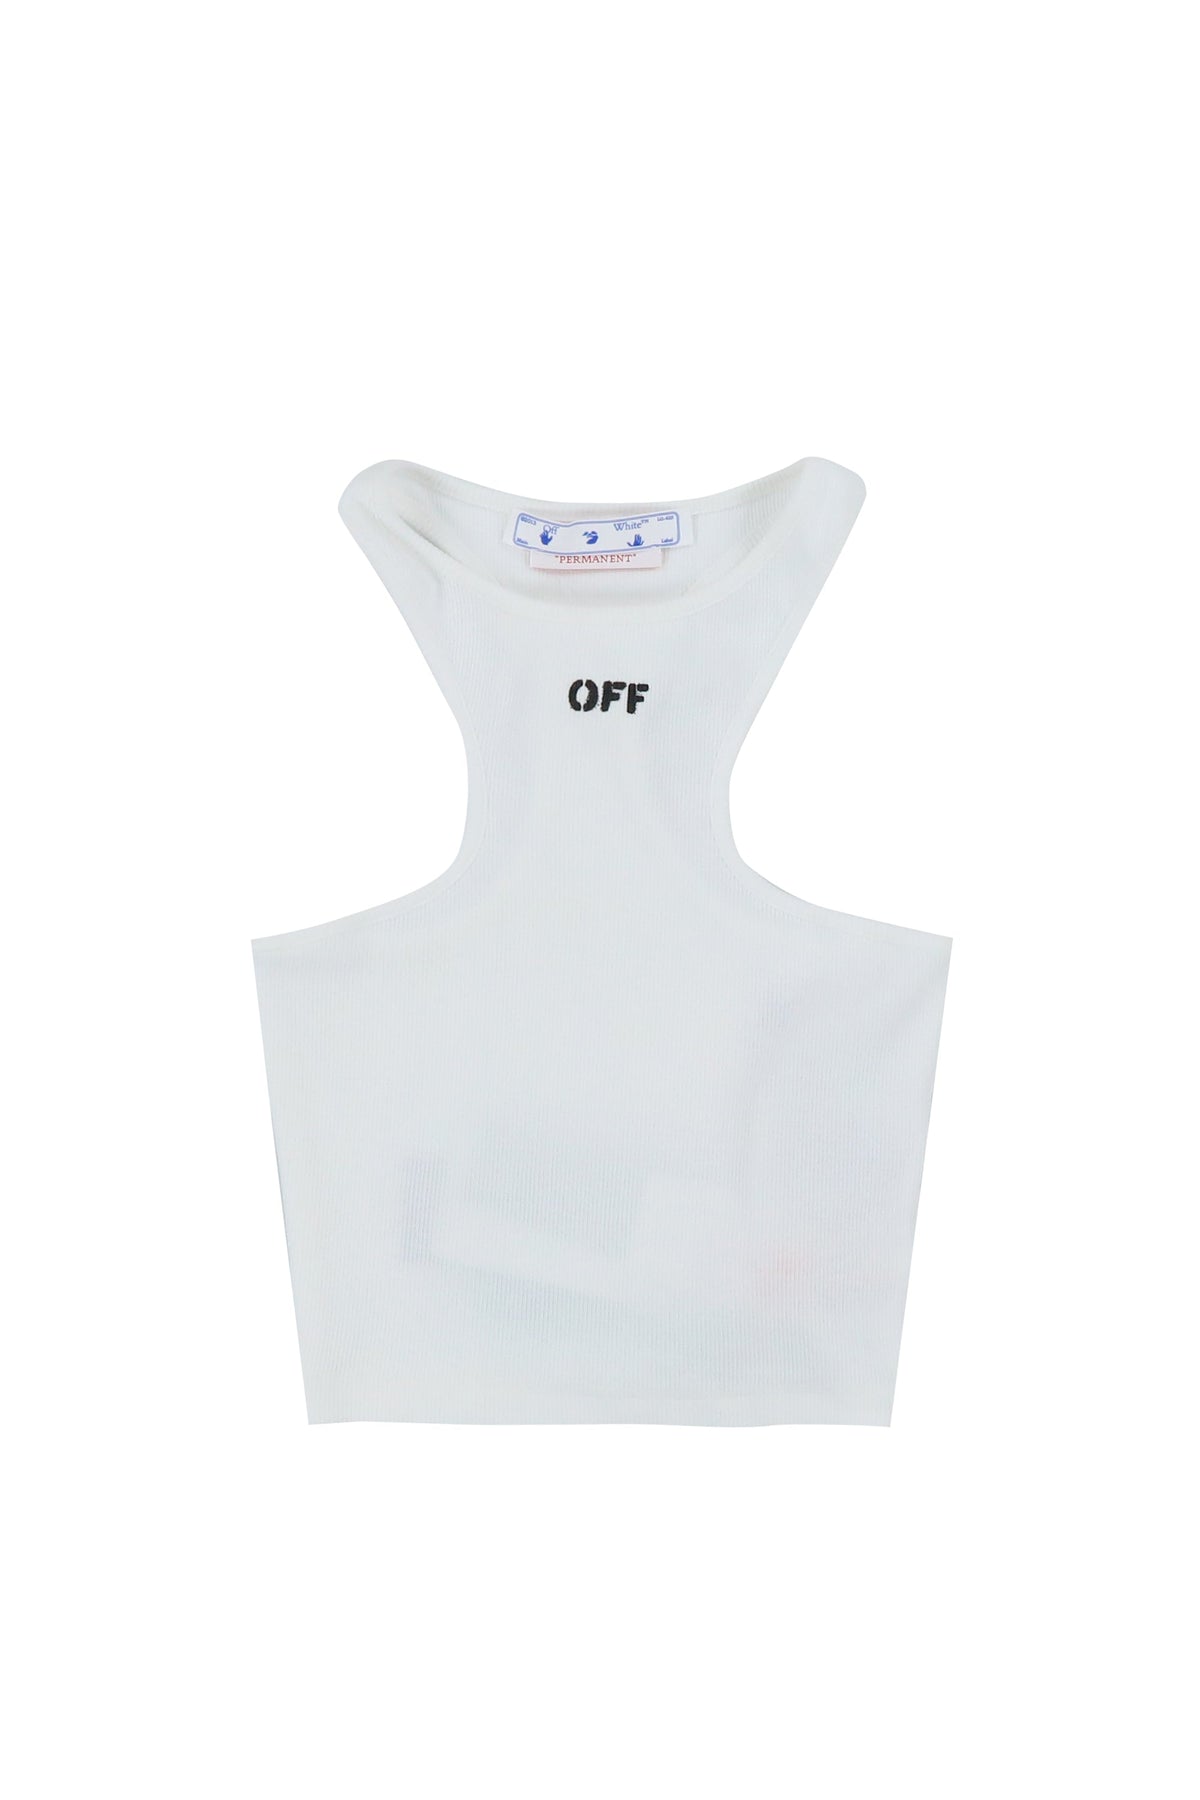 OFF STAMP ROWING TOP / WHT